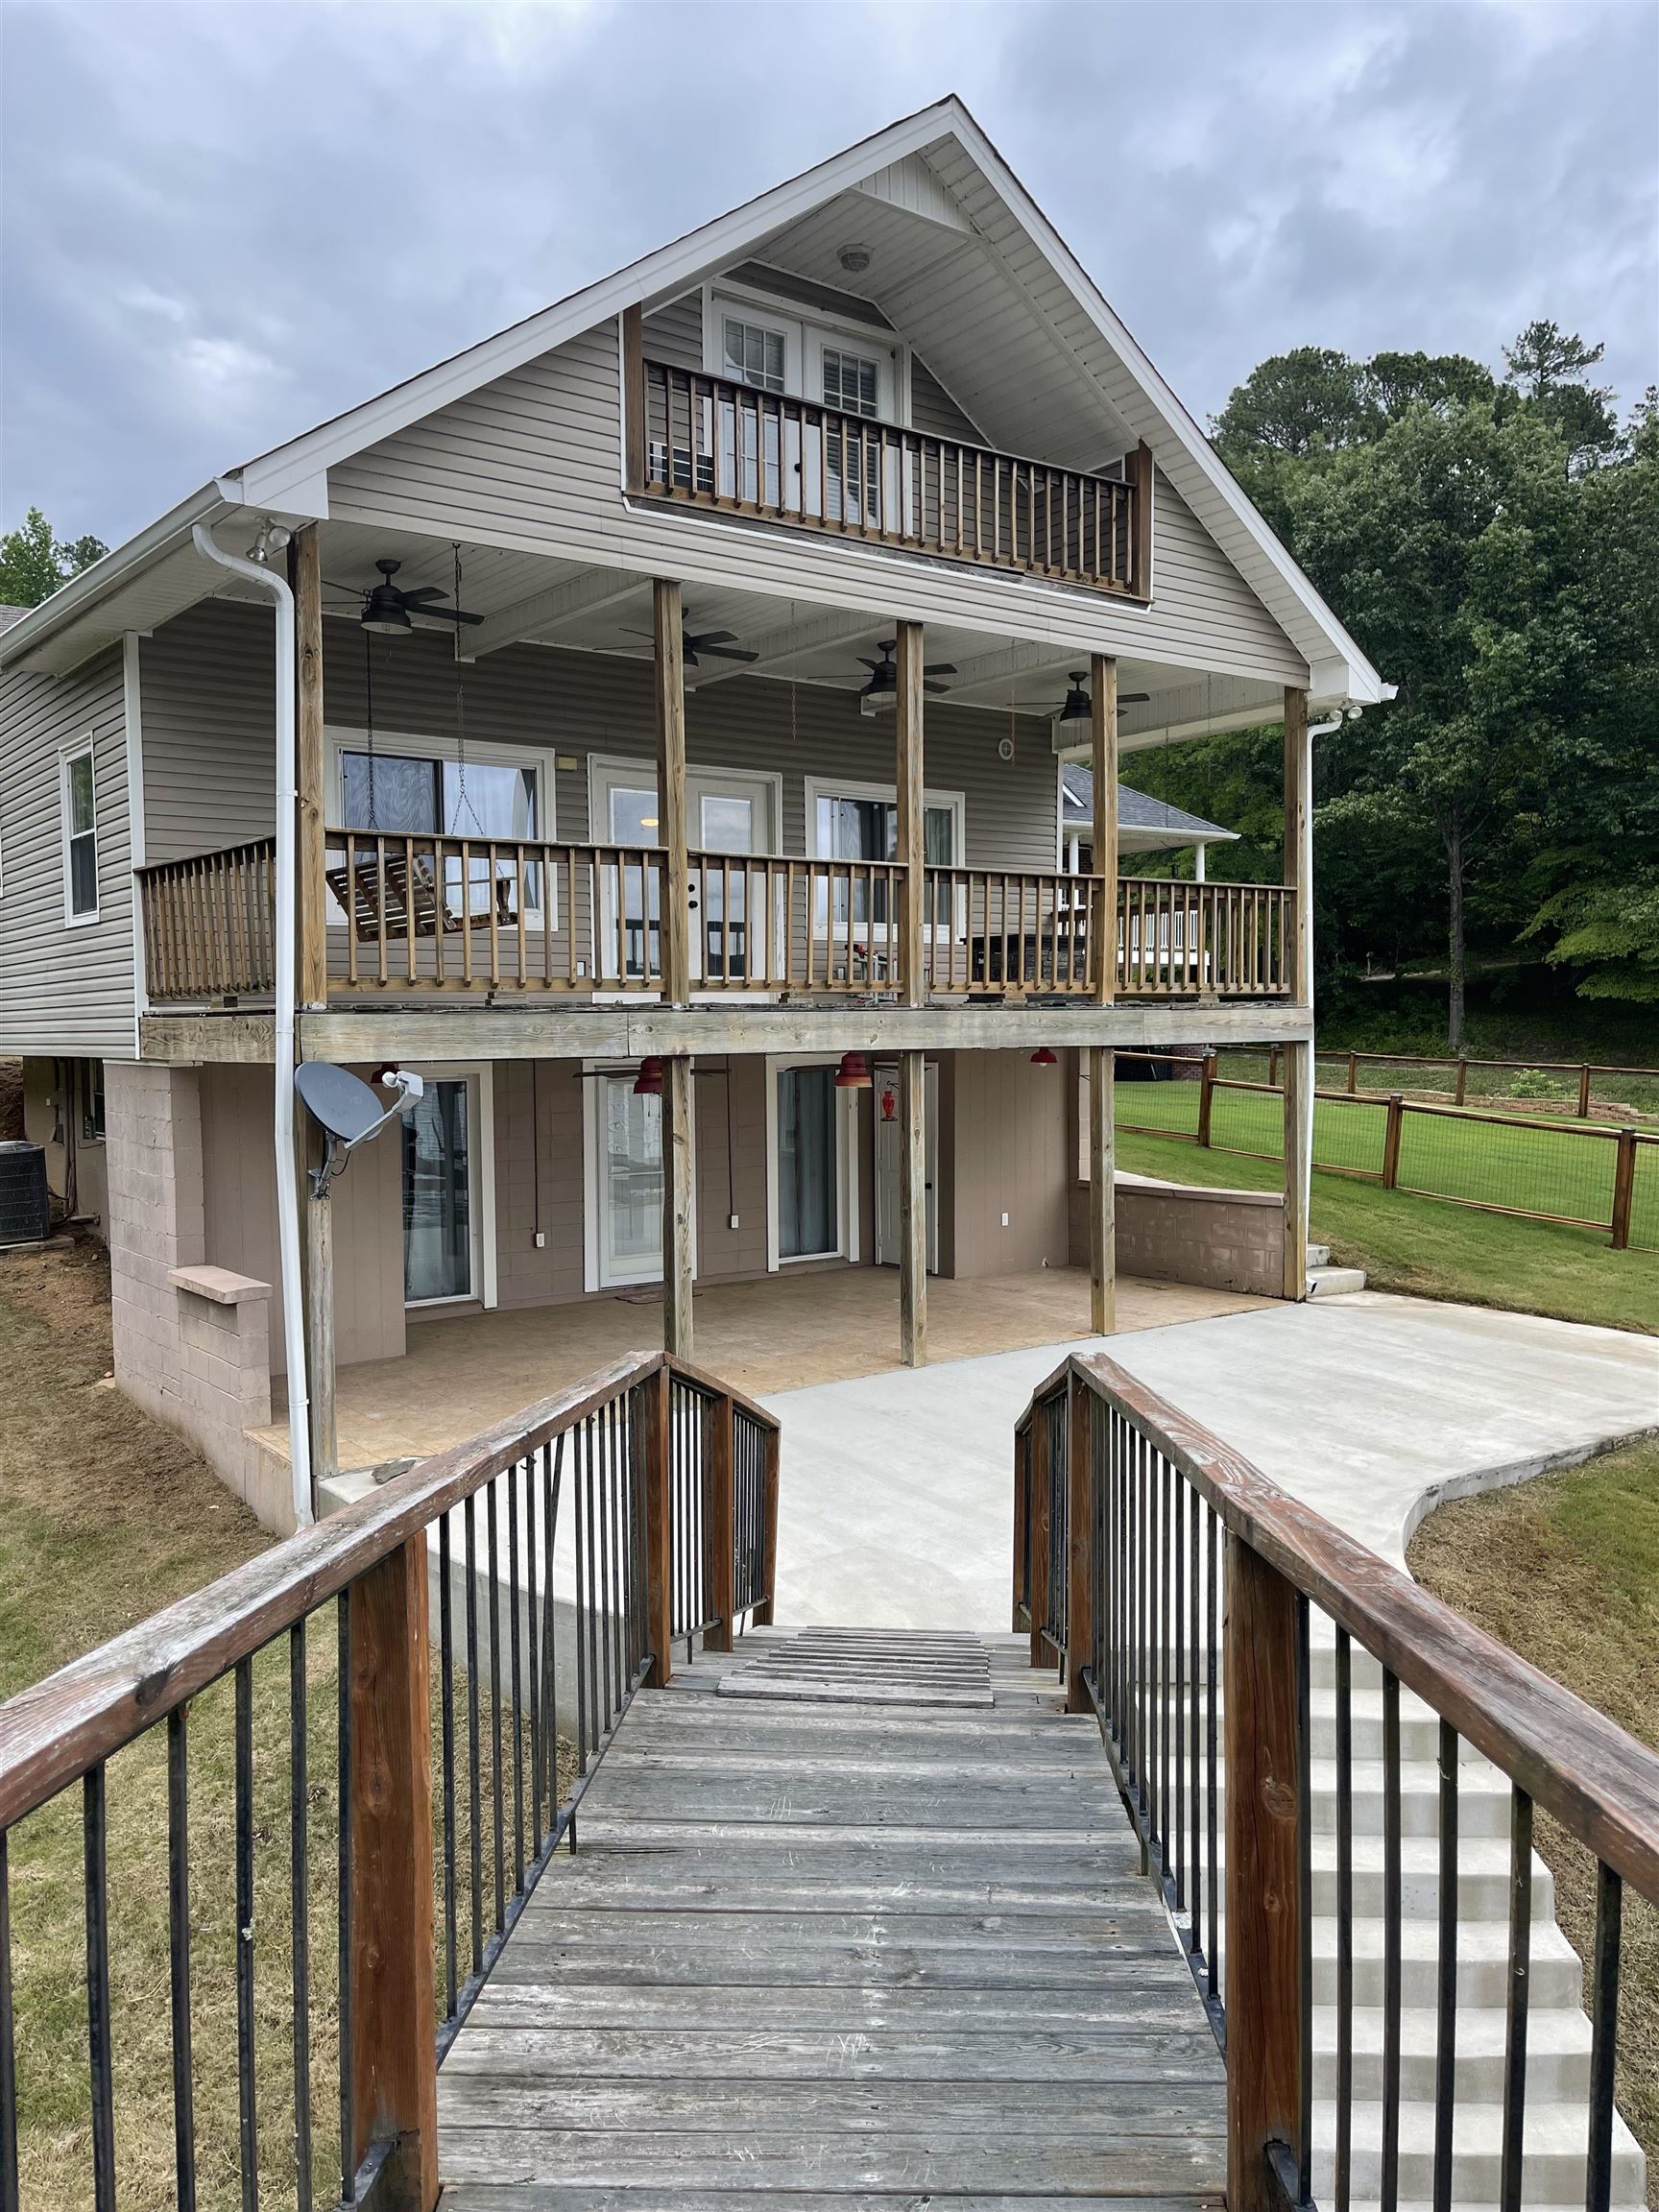 This River Home is BRAND NEW!!! The workmanship that has been poured into this remodel is amazing.  This house is right on the river and has a two level deck with double slips and two boat lifts.  Come see it today!